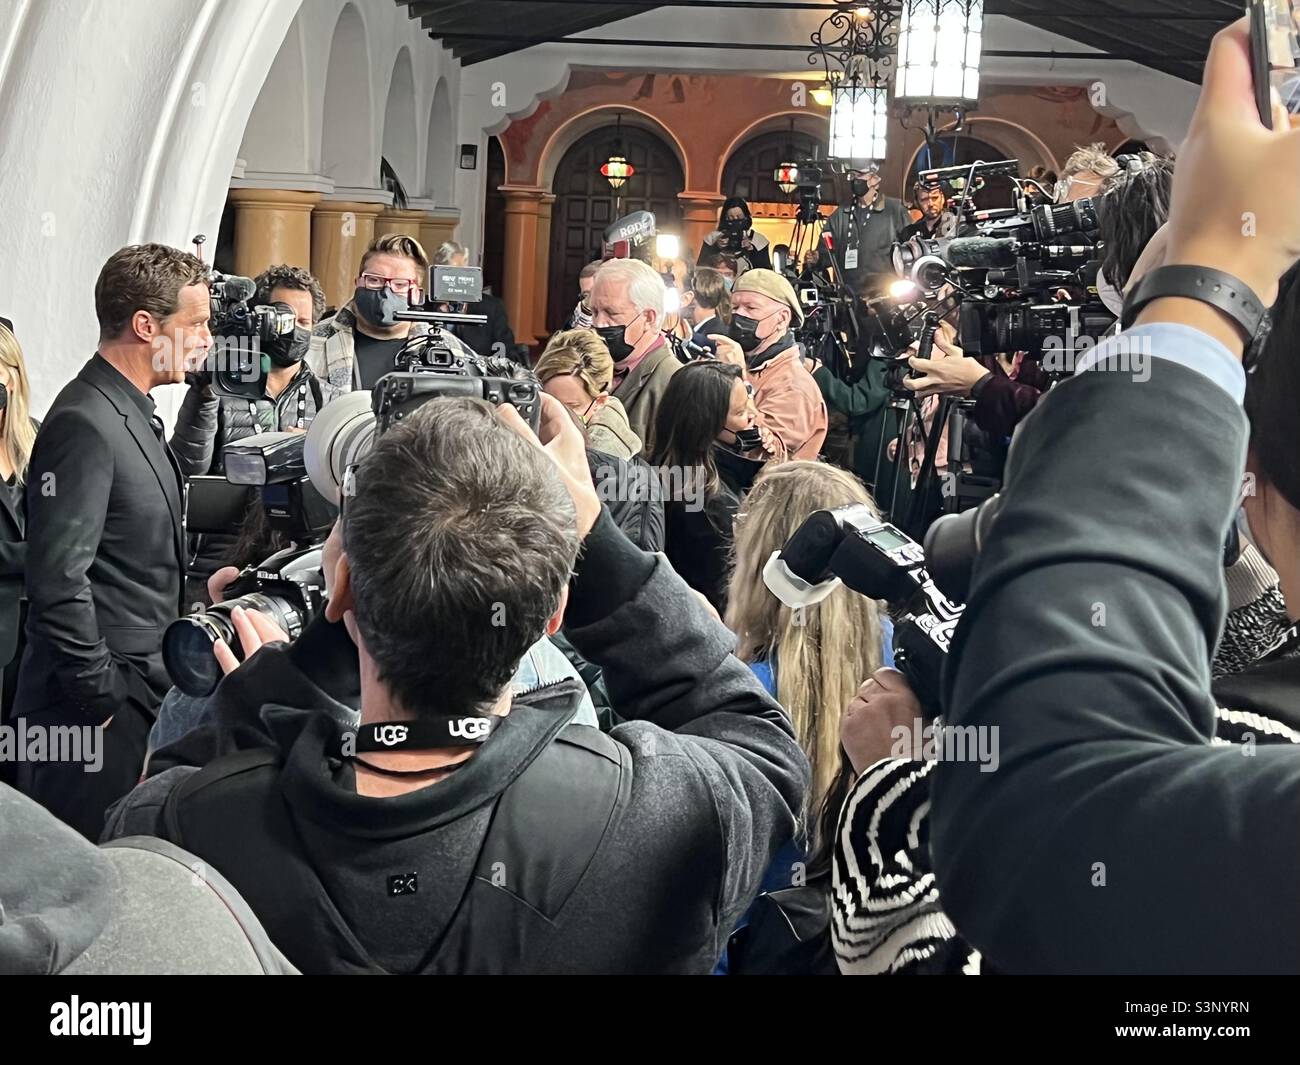 9 March 2022 Benedict Cumberbatch is surrounded by the press and paparazzi at the Santa Barbara International Film Festival. Credit: Lisa Werner/ Alamy/ Stockimo News Stock Photo